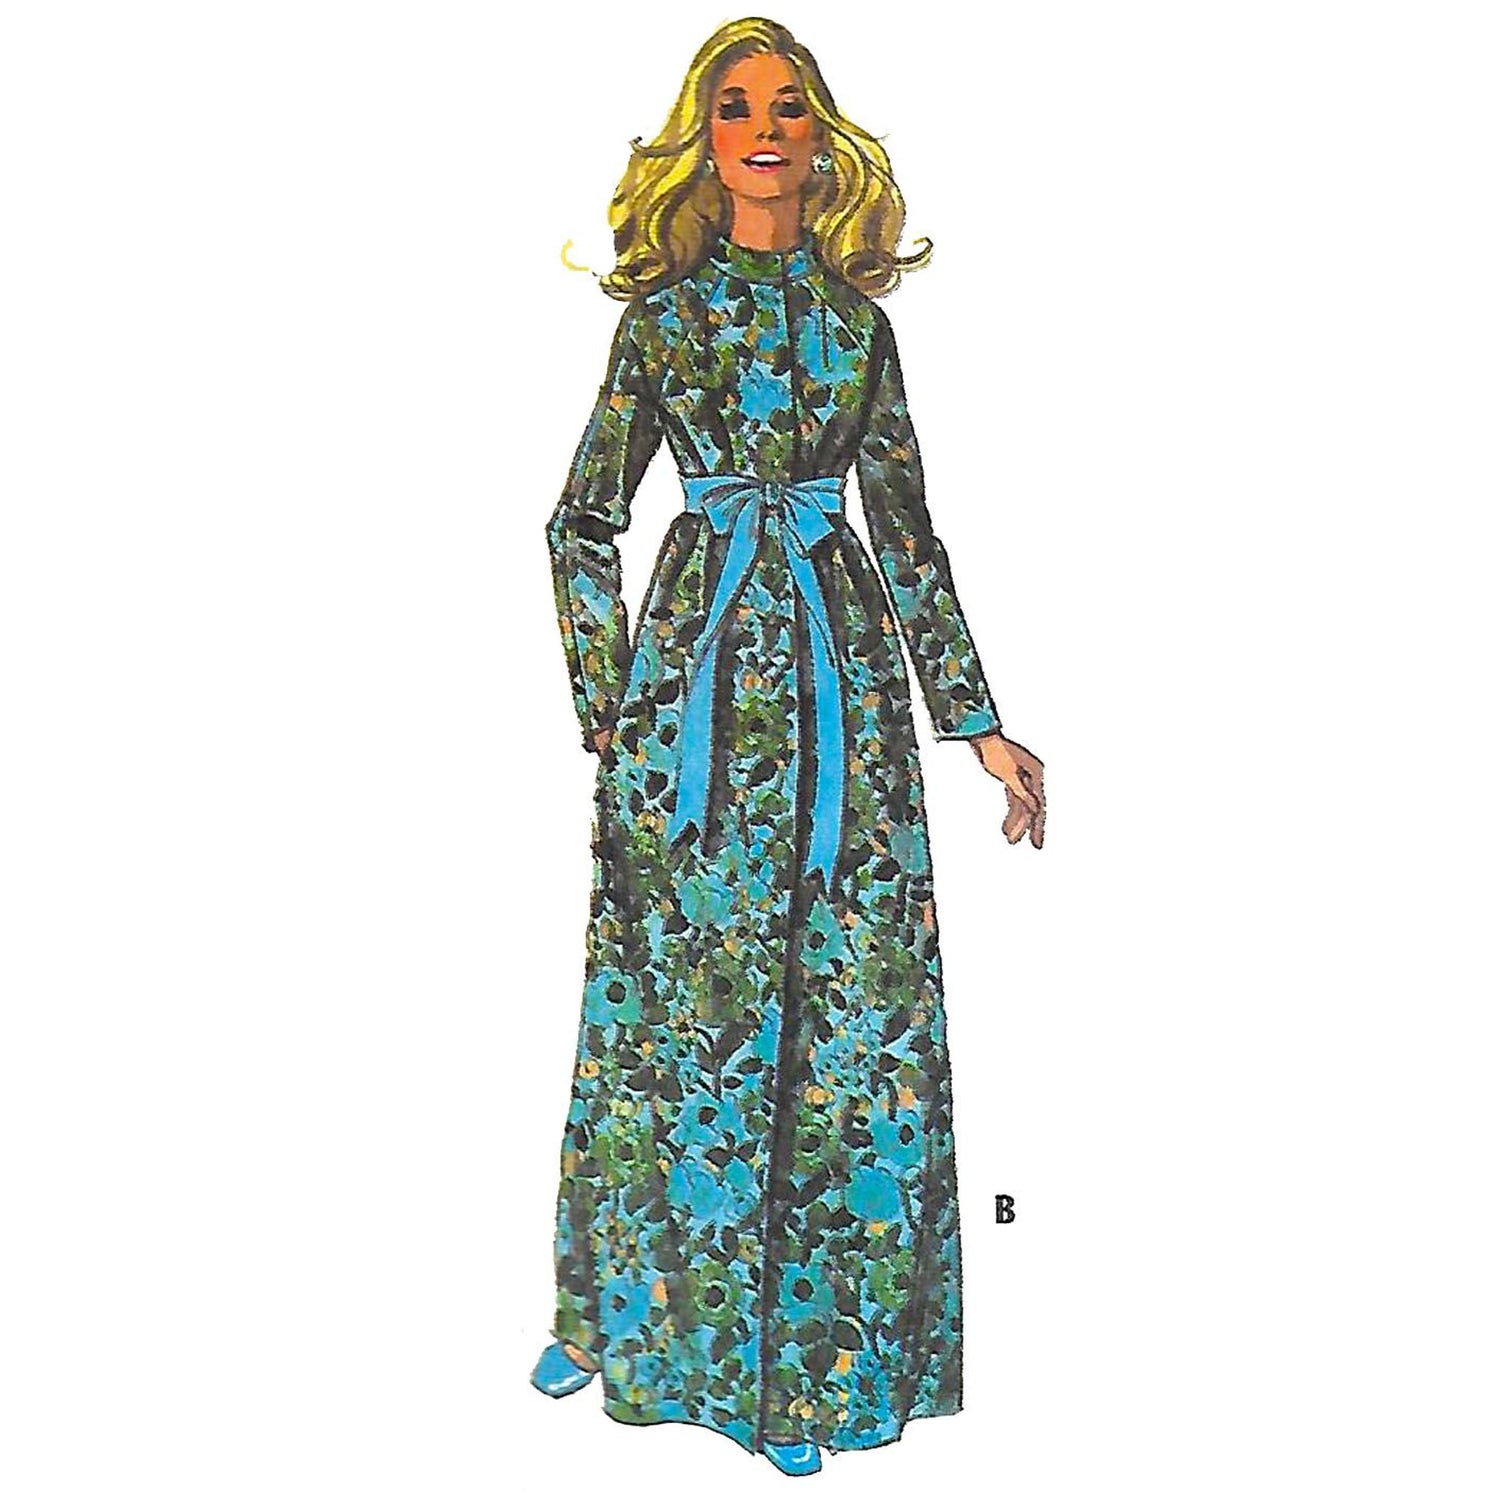 Model wearing 1970s robe in three versions made from McCall’s 2696 pattern